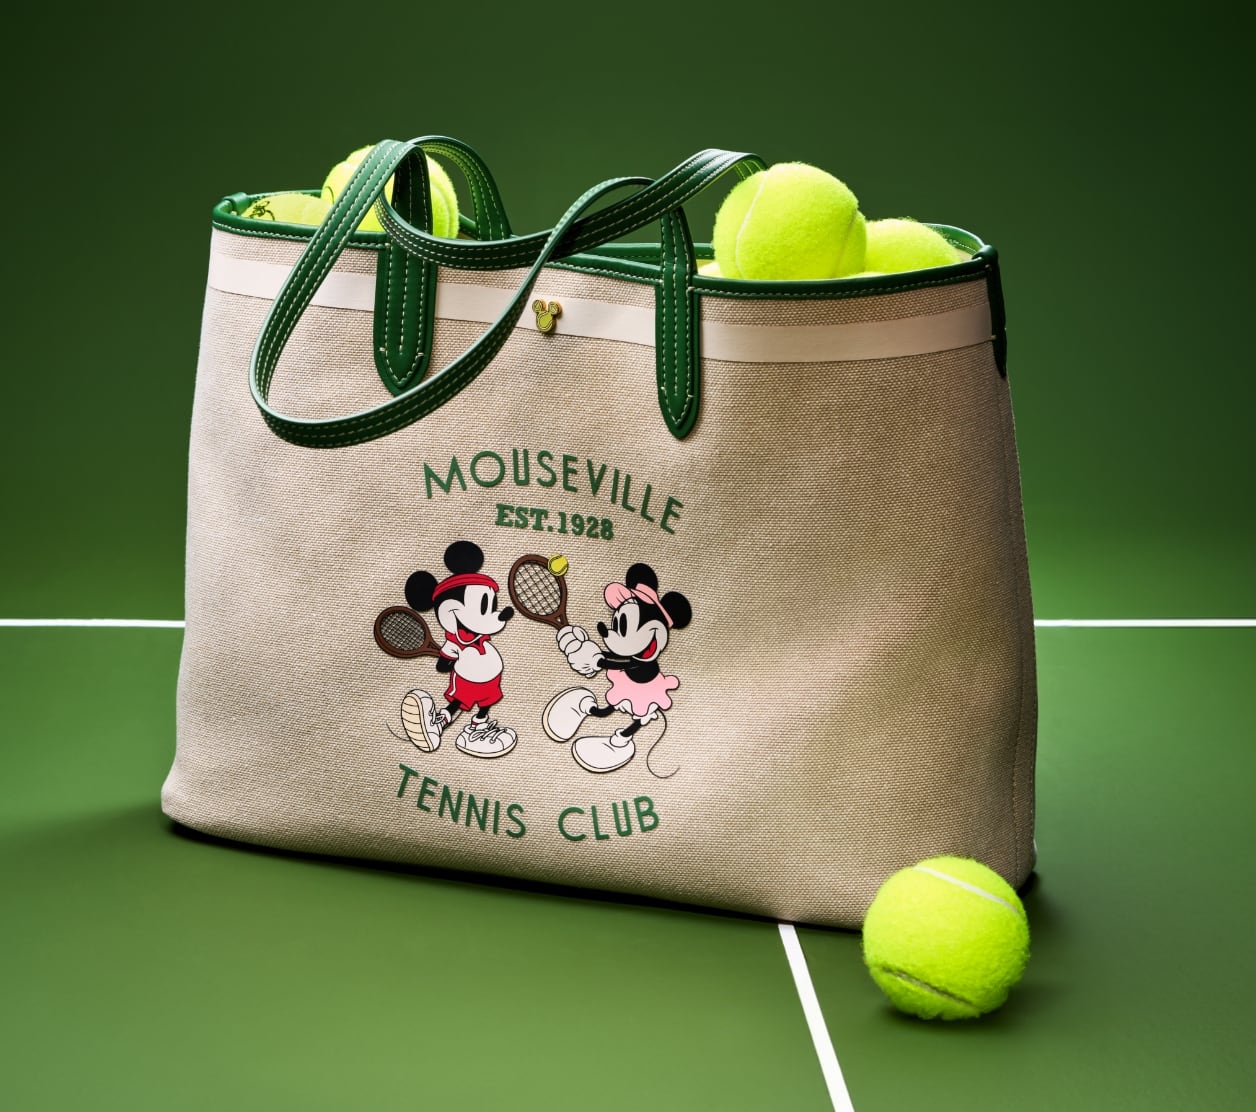 Our special-edition Disney Tennis tote, filled with bright green tennis balls and showcased on a tennis court. Crafted of cotton canvas with green leather trim, the bag features a screenprinted graphic of Mickey and Minnie playing tennis with the text 'Mouseville Tennis Club, Est. 1928.'